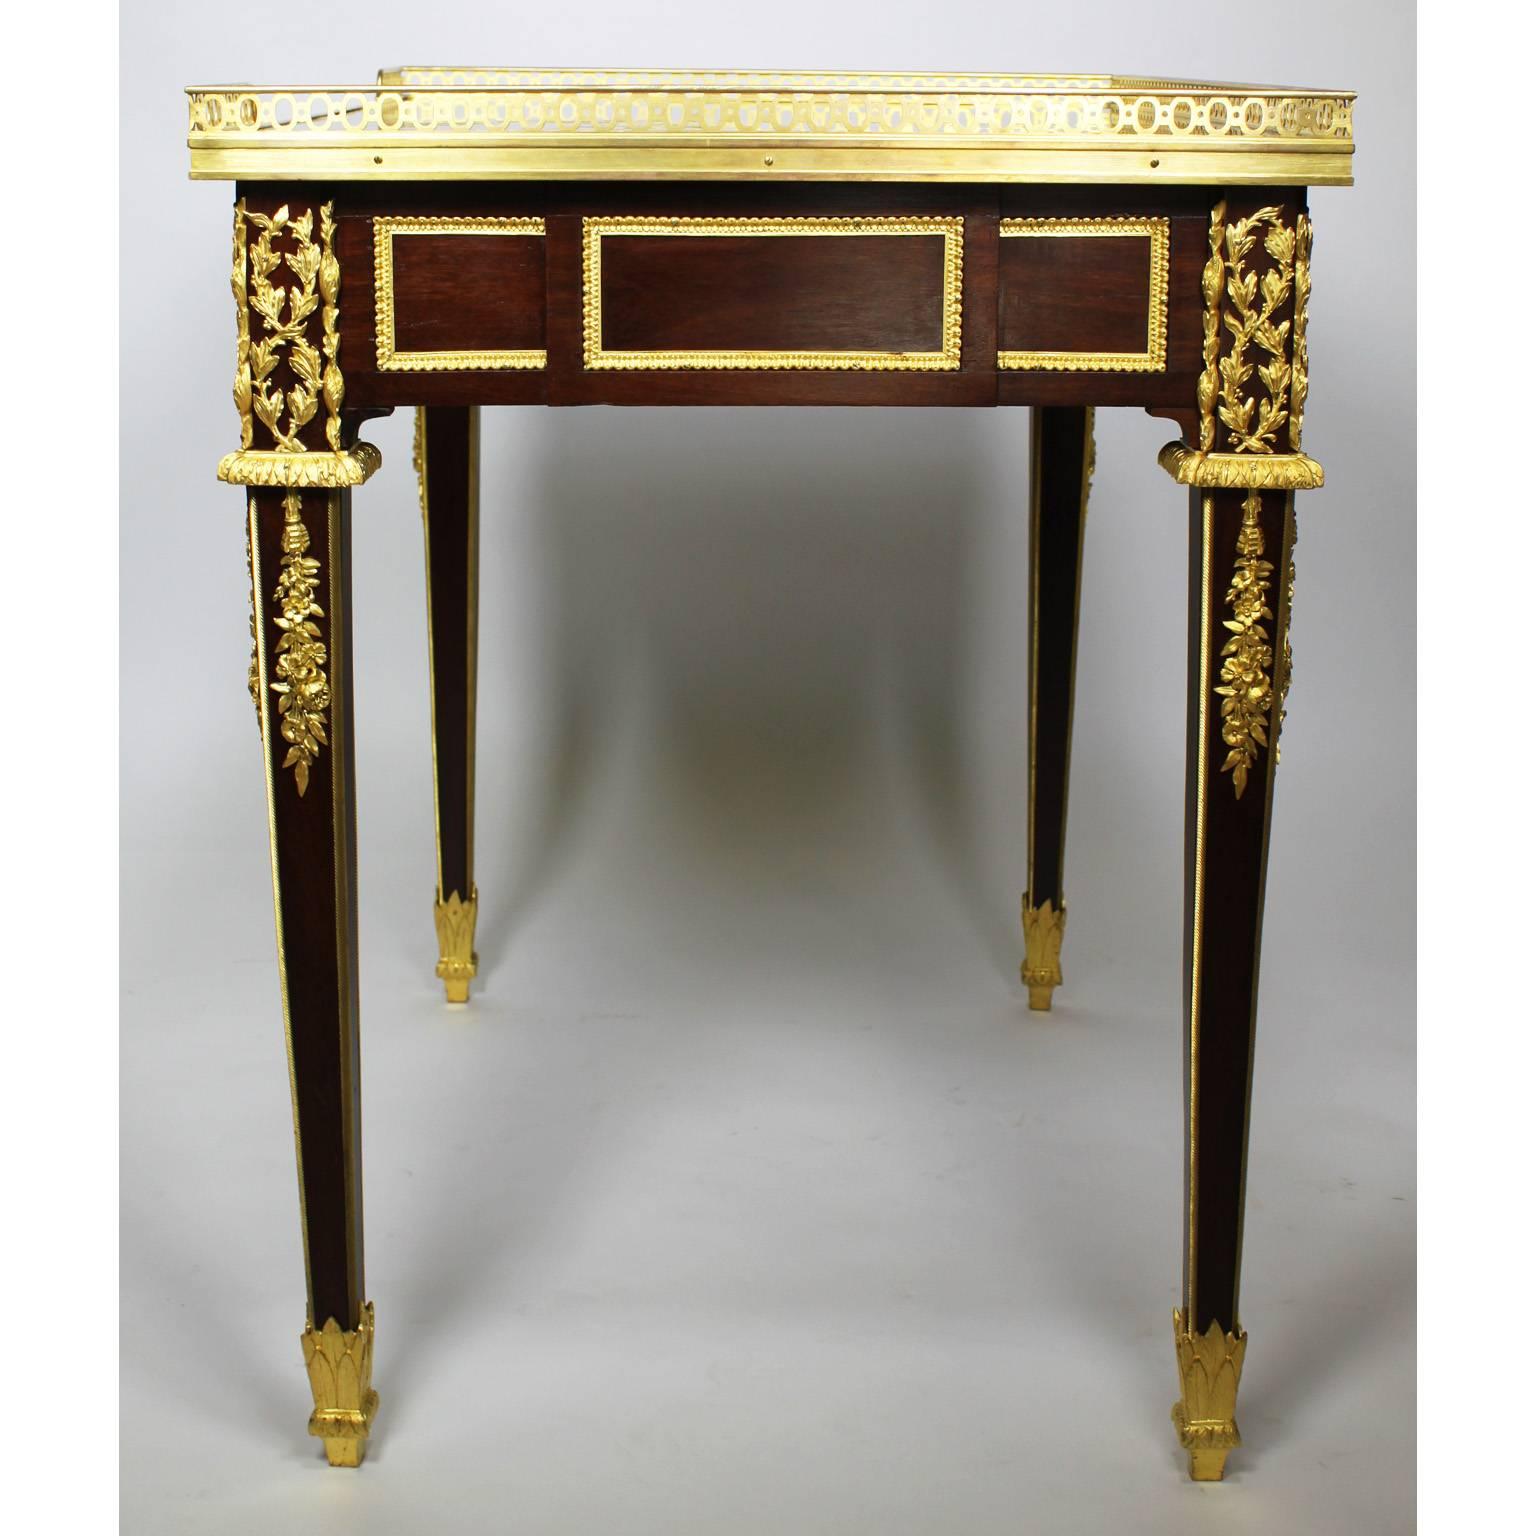 Early 20th Century French 19th-20th Century Louis XVI Style Mahogany and Gilt-Bronze Mounted Table